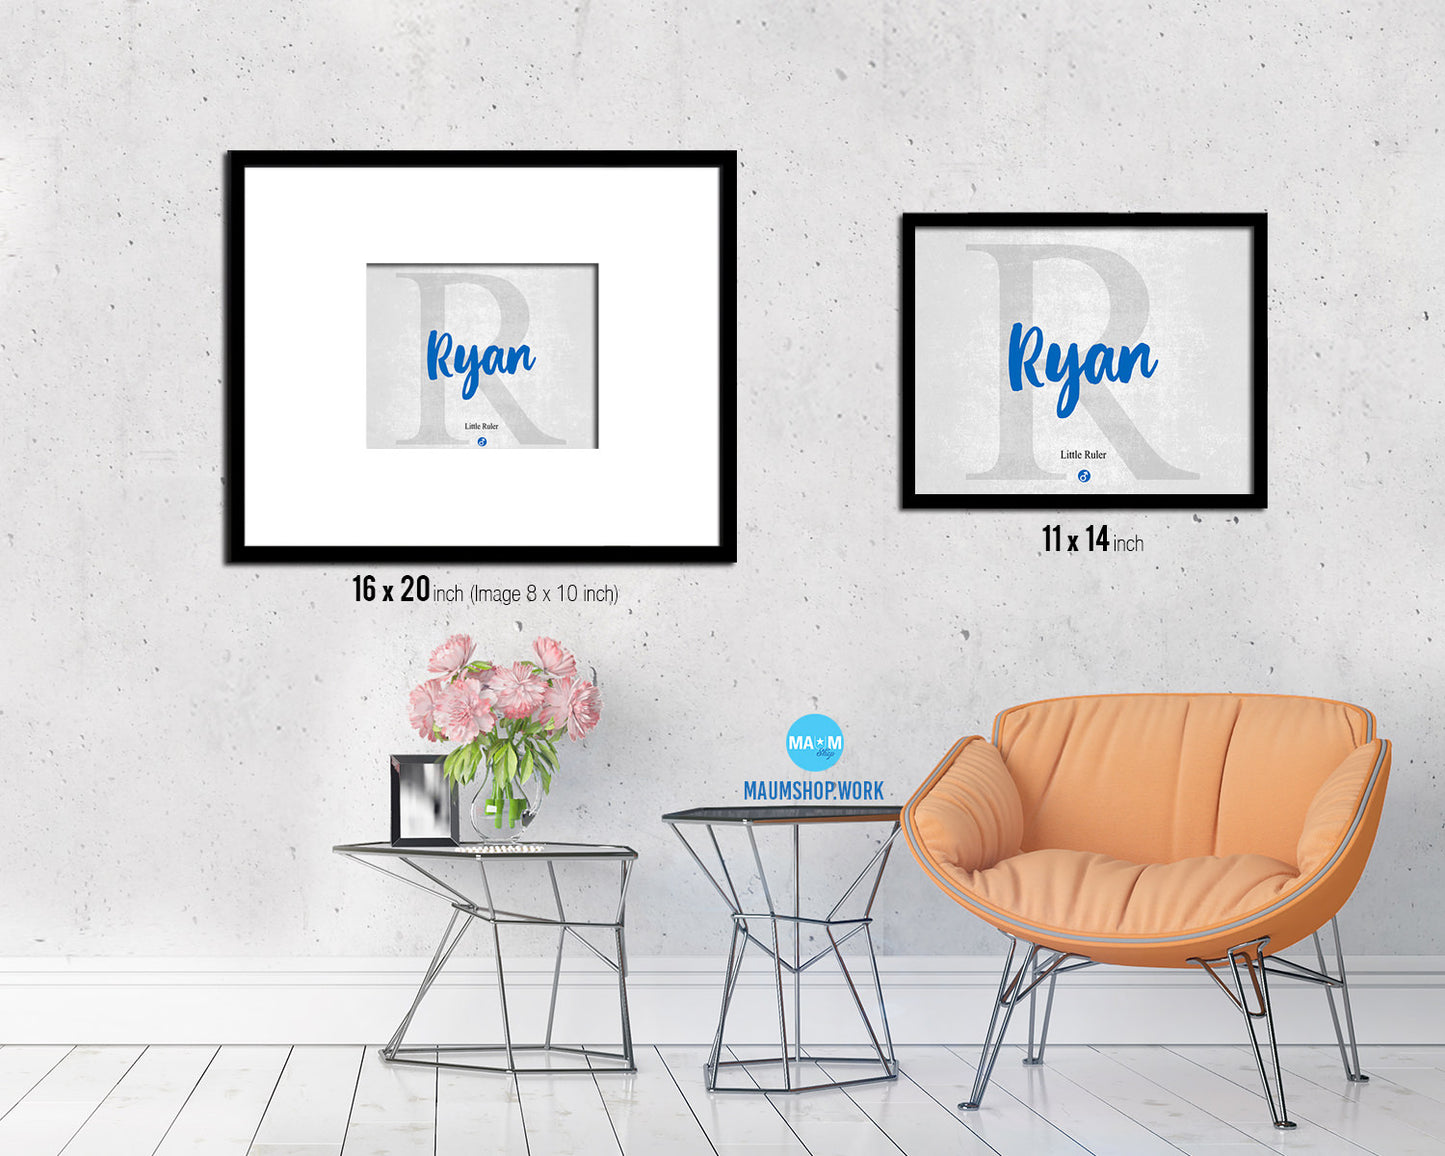 Ryan Personalized Biblical Name Plate Art Framed Print Kids Baby Room Wall Decor Gifts